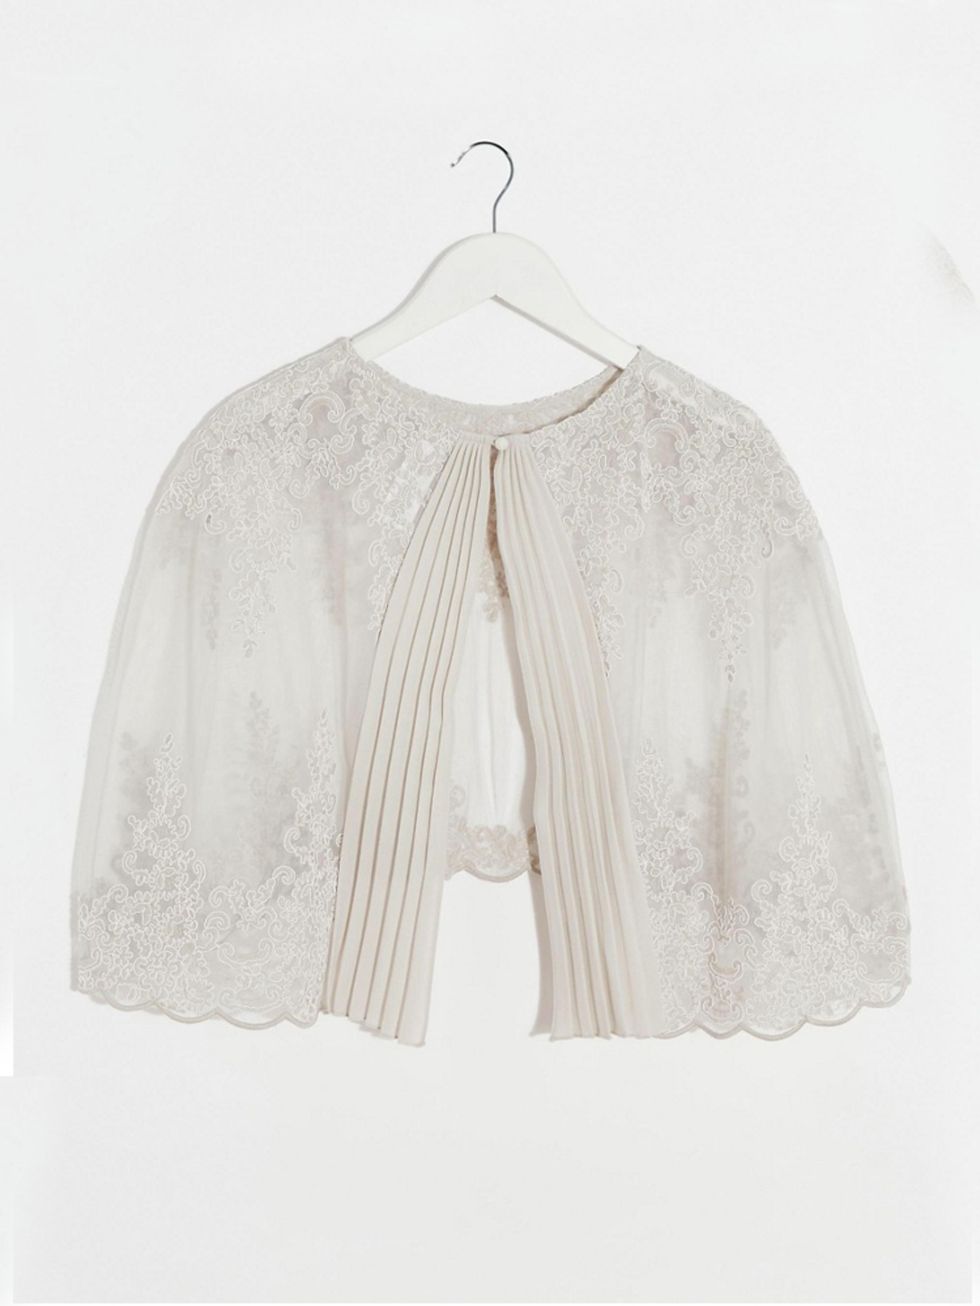 <p>Lace cape, £40, <a href="http://www.asos.com/asos/asos-premium-wedding-lace-and-pleat-back-cape/prod/pgeproduct.aspx?iid=6020031&clr=Lightgrey&SearchQuery=cape+wedding&pgesize=33&pge=0&totalstyles=33&gridsize=3&gridrow=1&gridcolumn=1" target="_blank">A